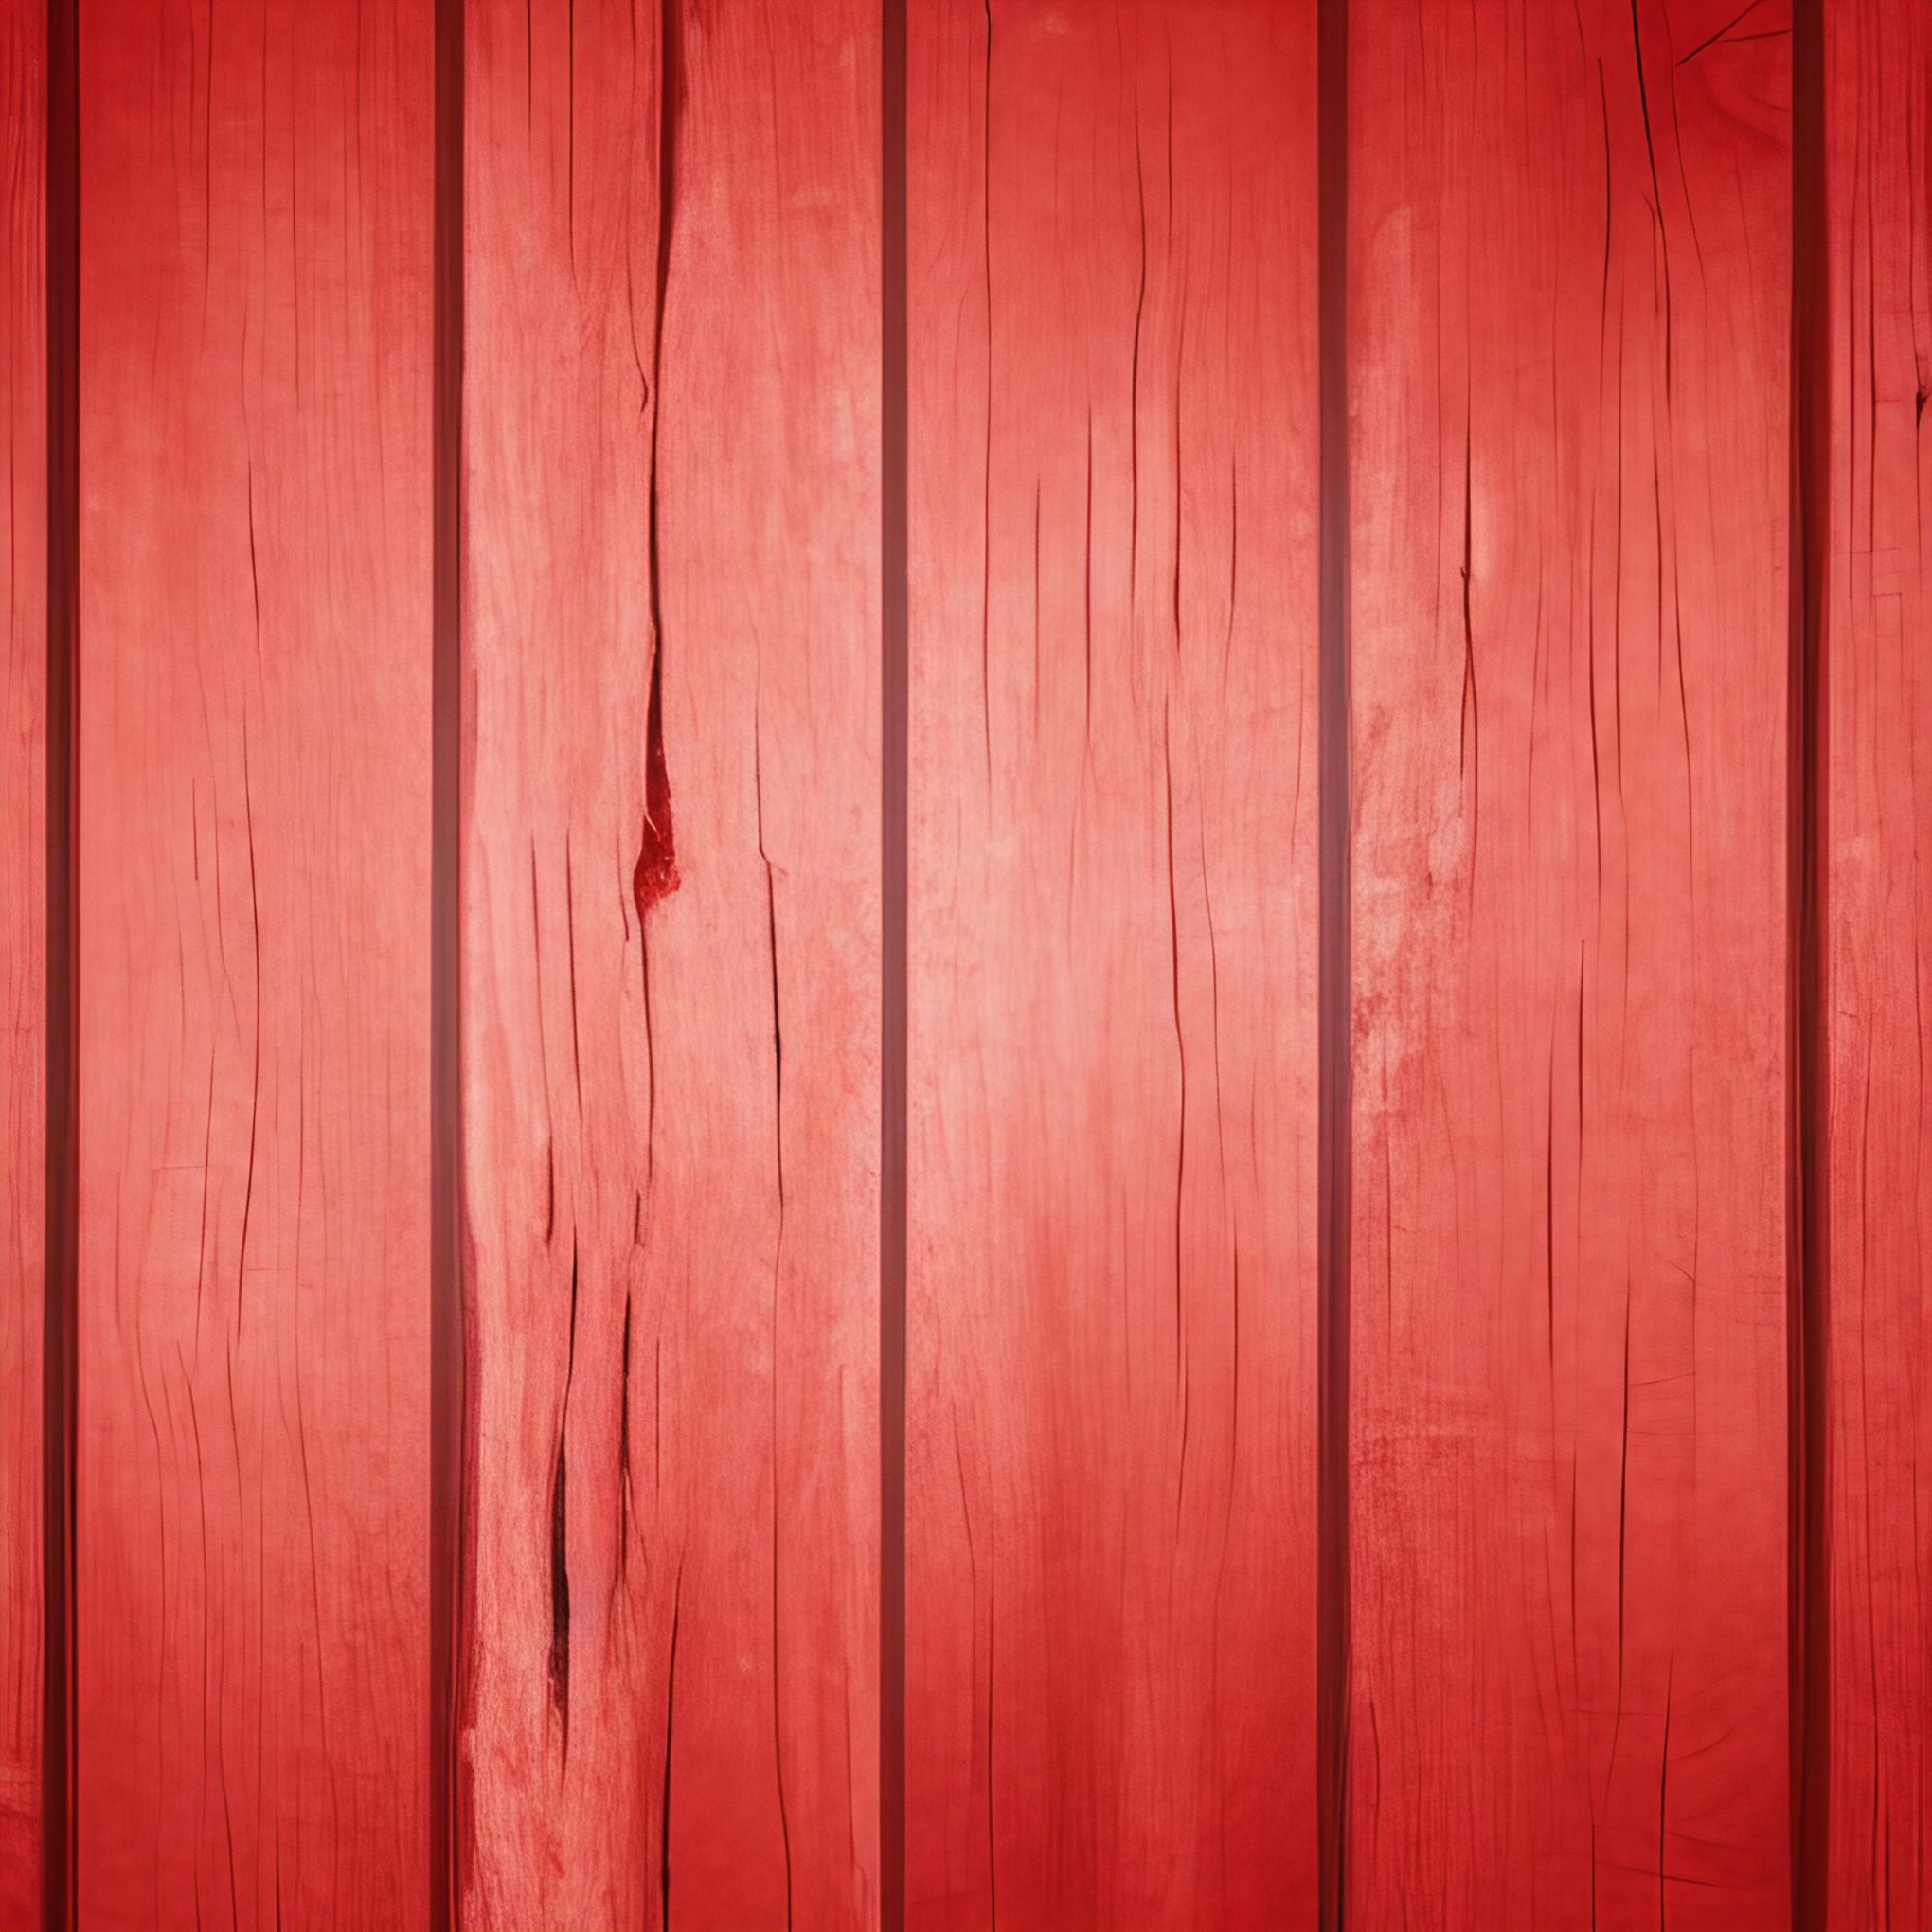 Red Painted Old Wooden Cracked and Splinted Planks